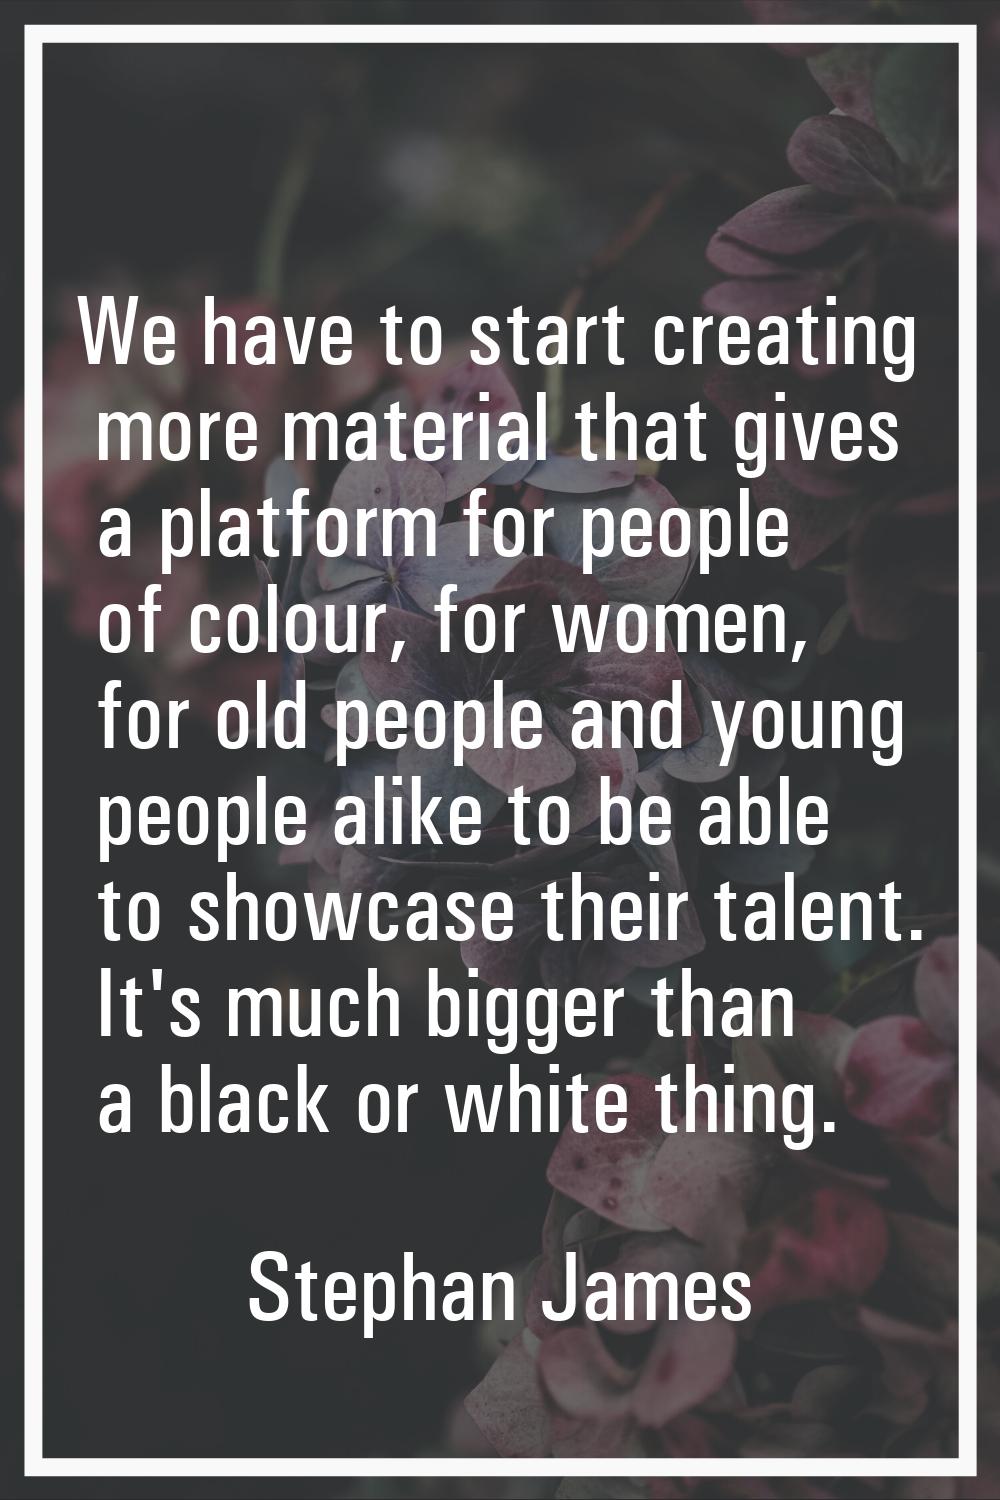 We have to start creating more material that gives a platform for people of colour, for women, for 